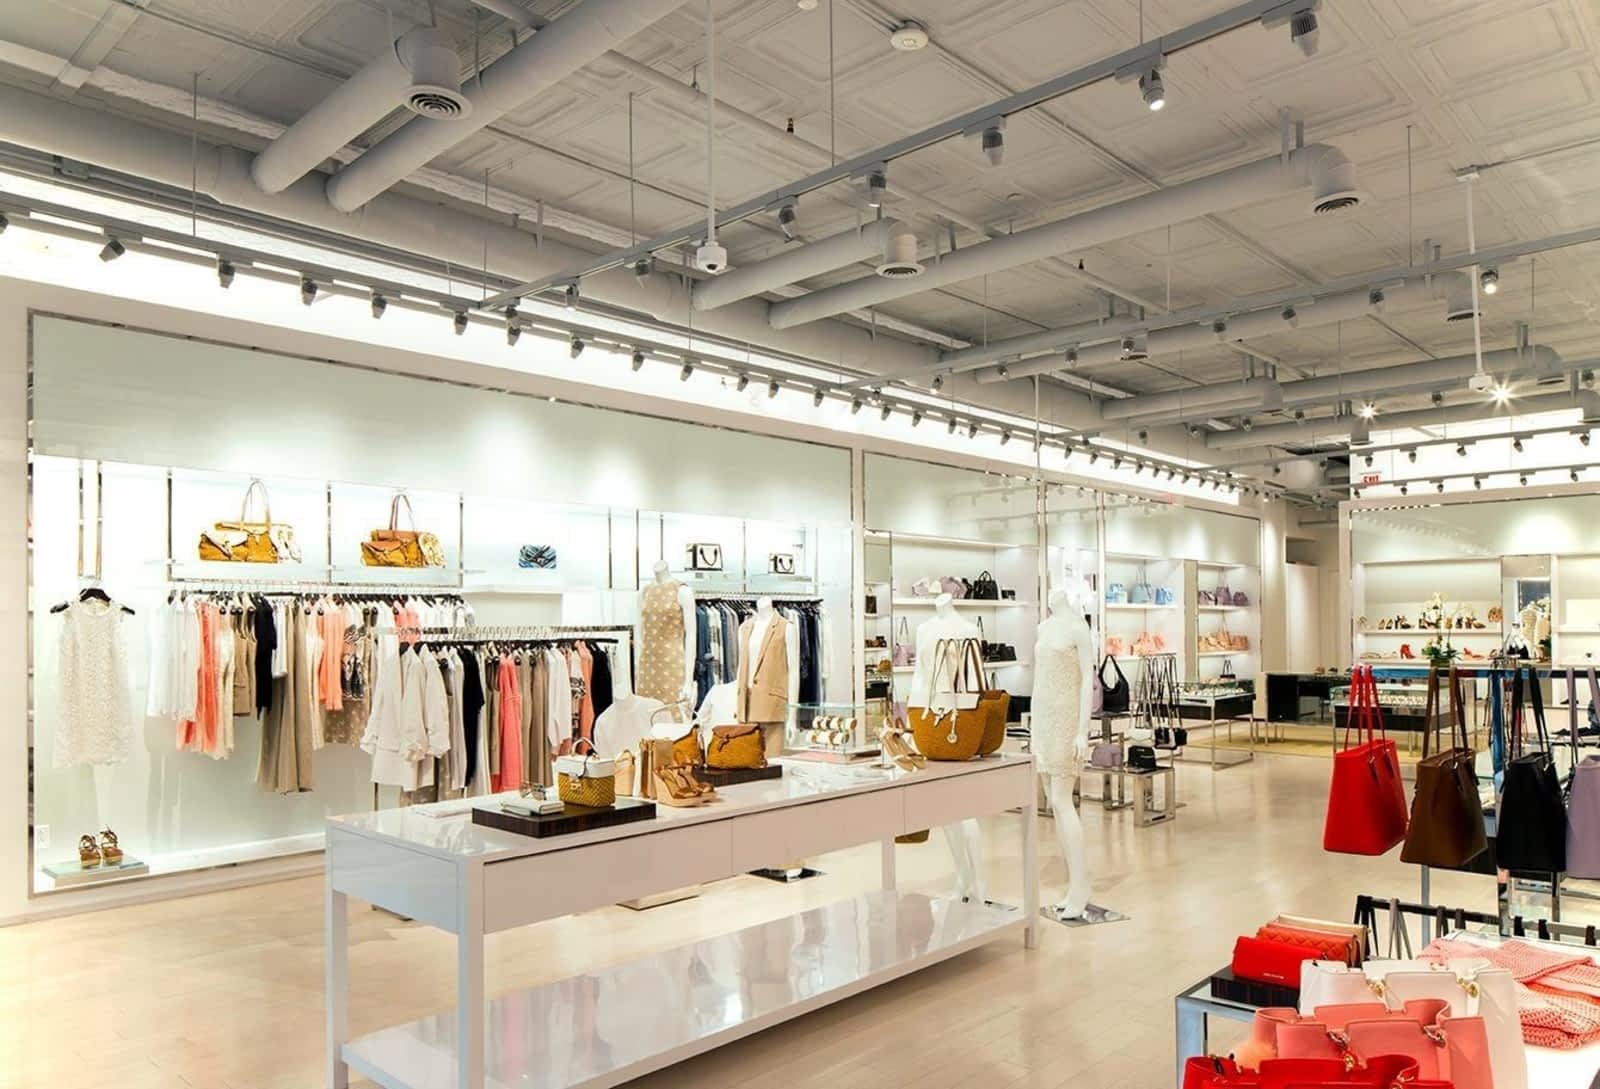 michael kors outlet canada locations